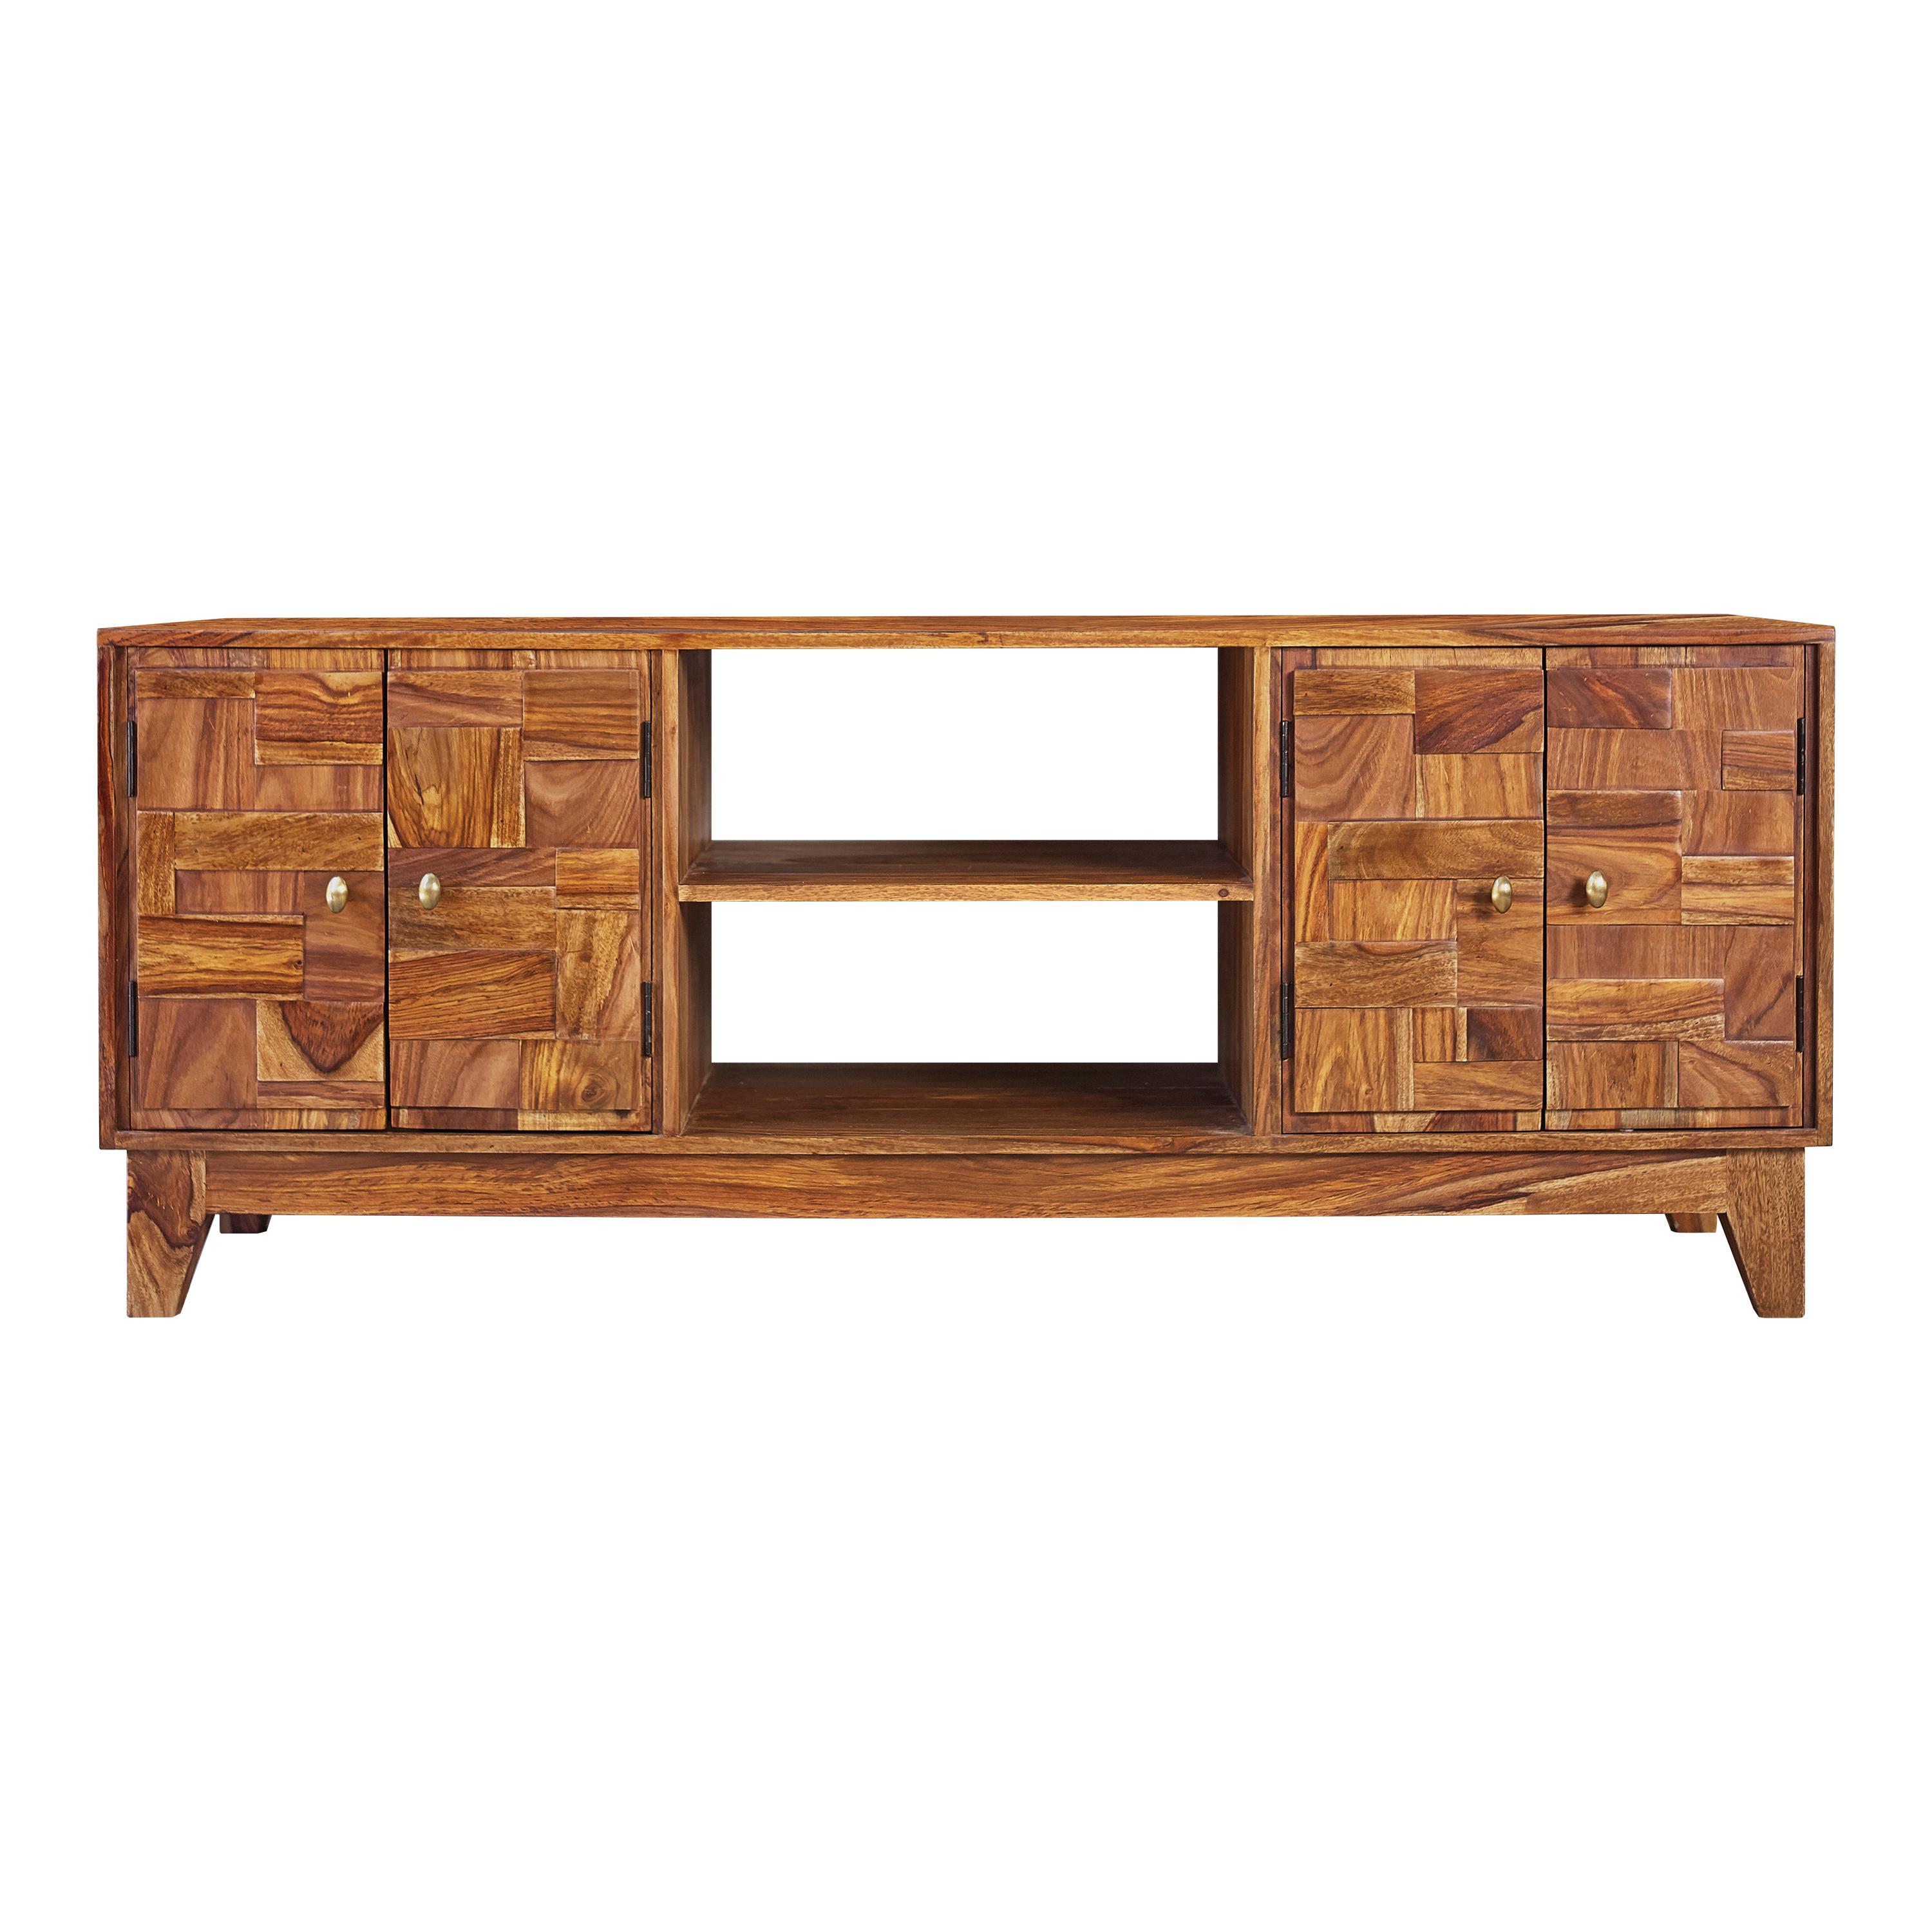 Transitional Tv Console 708382 708382 in Natural 